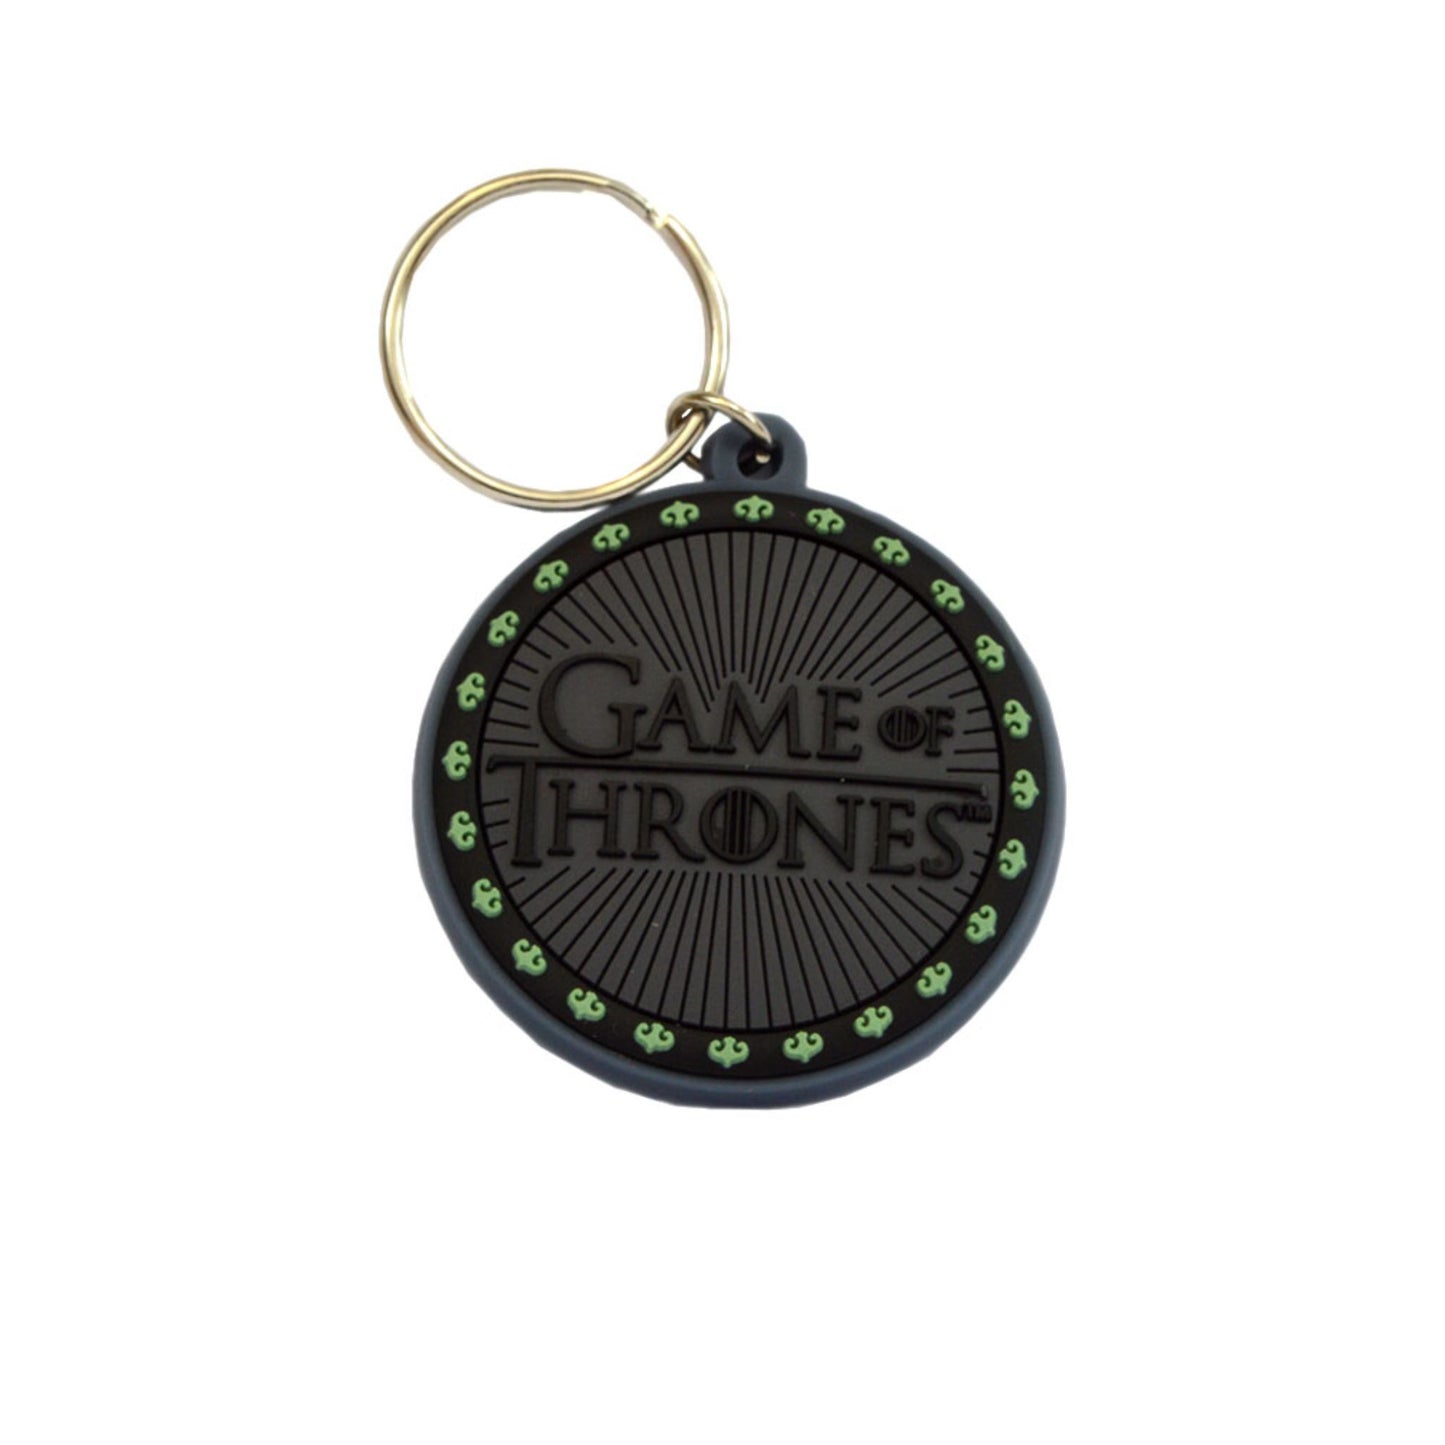 GAME OF THRONES (LOGO) RUBBER KEYCHAIN